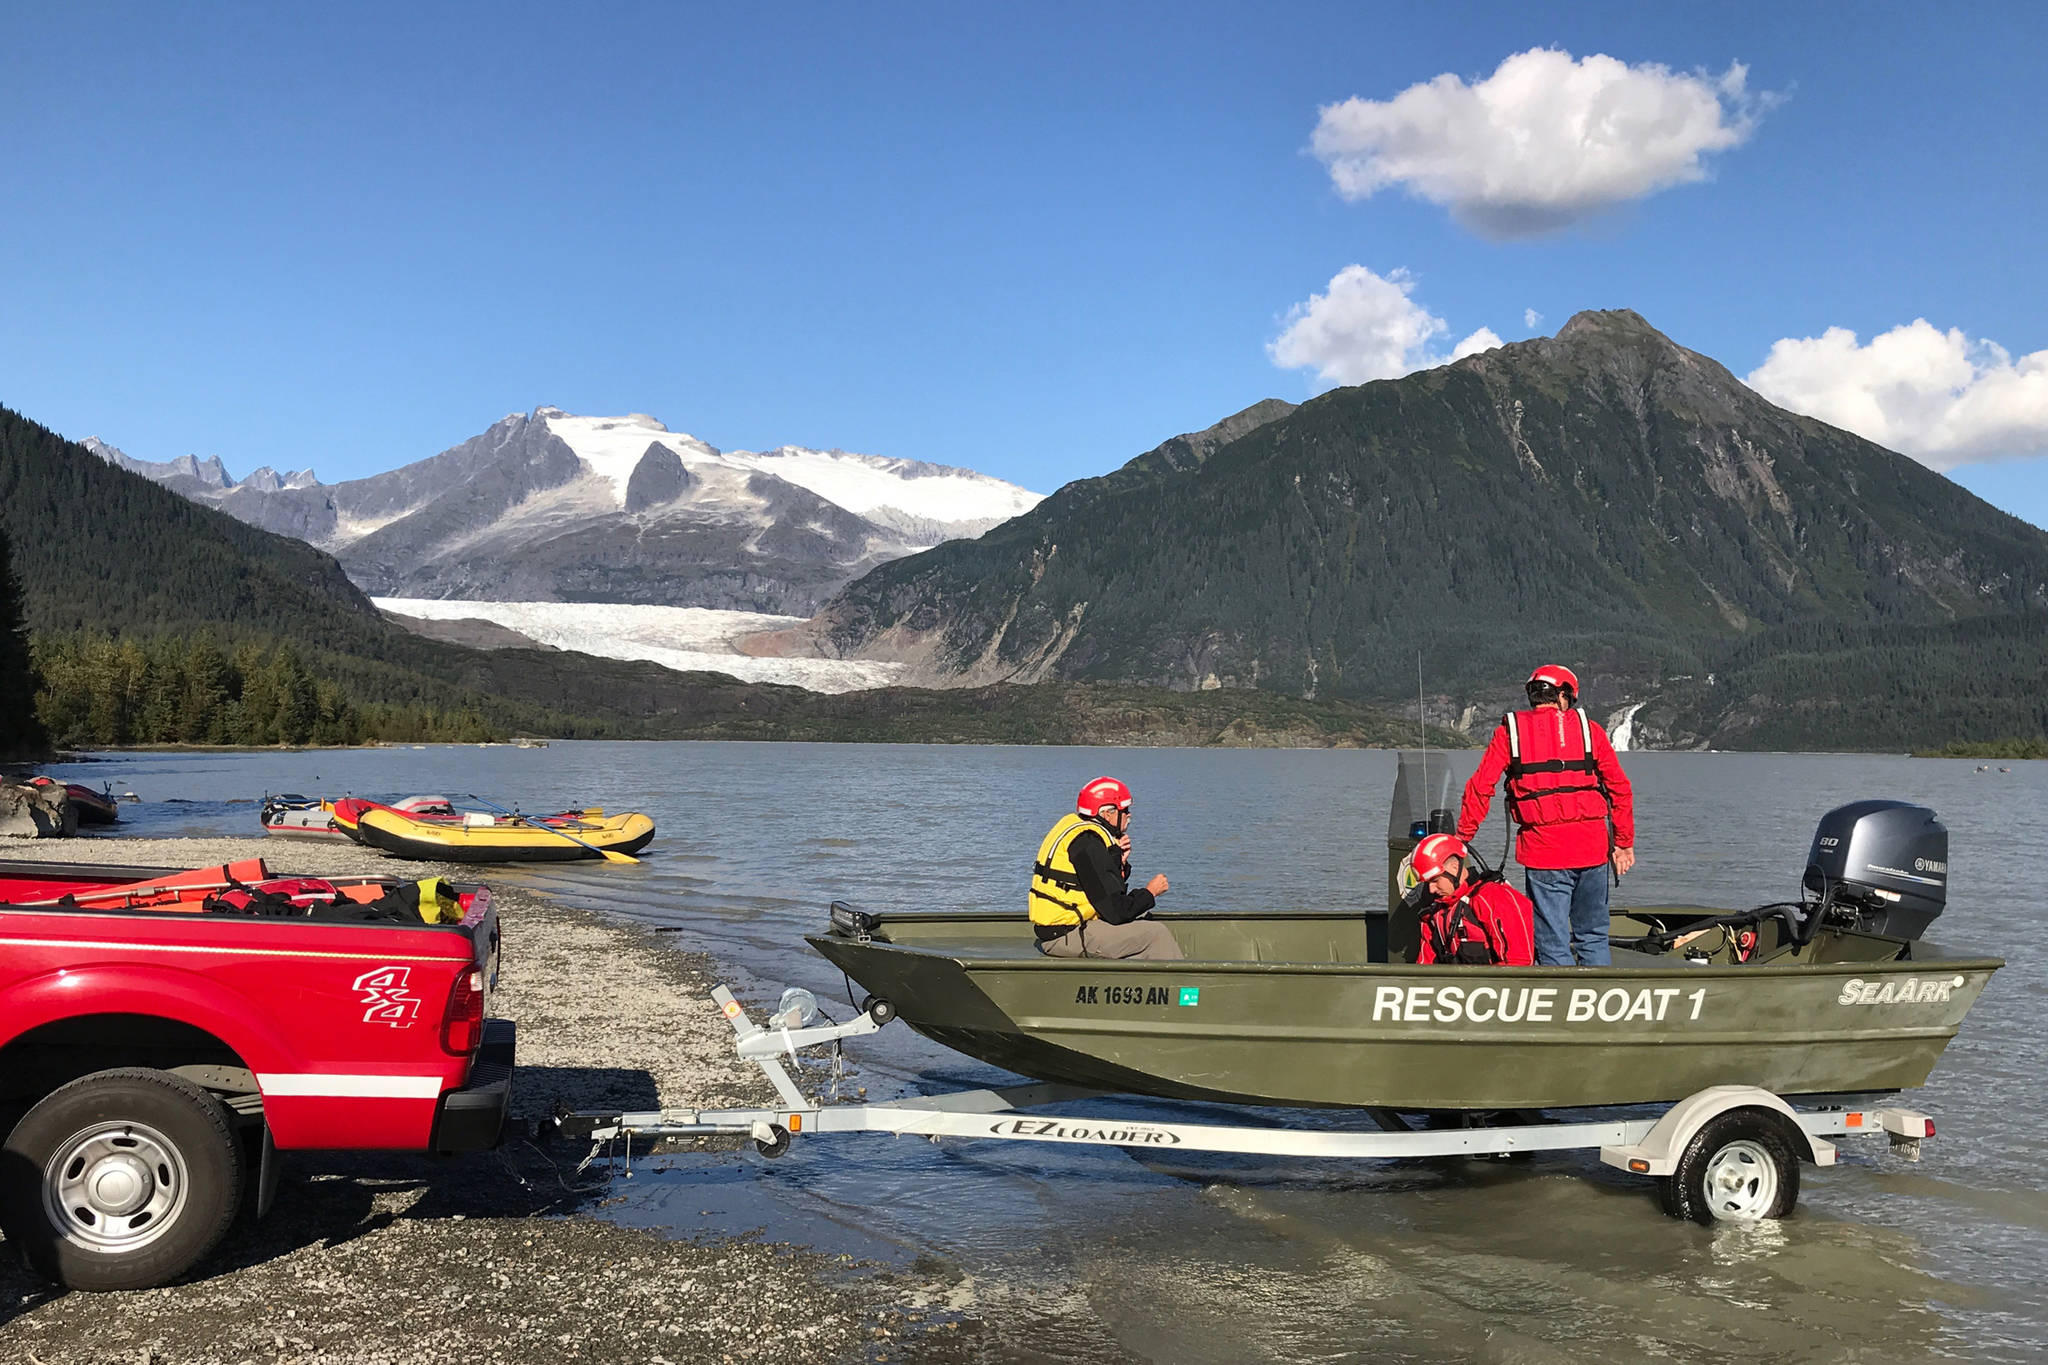 Tourist cold but unharmed after tumble into Mendenhall Lake